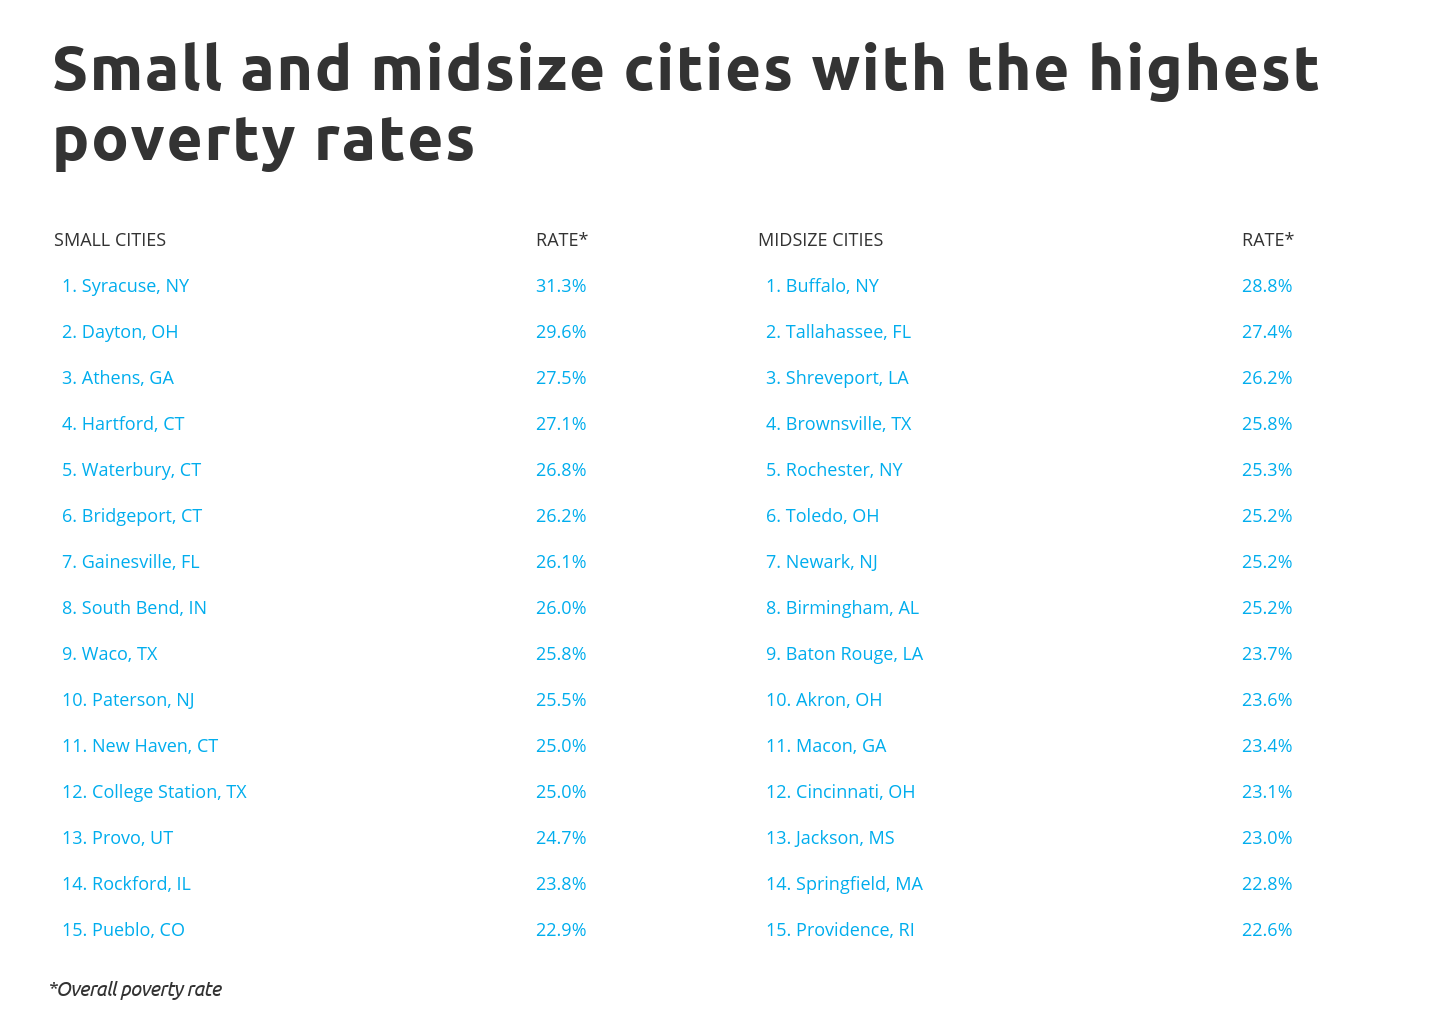 Small and midsize cities with the highest poverty rates